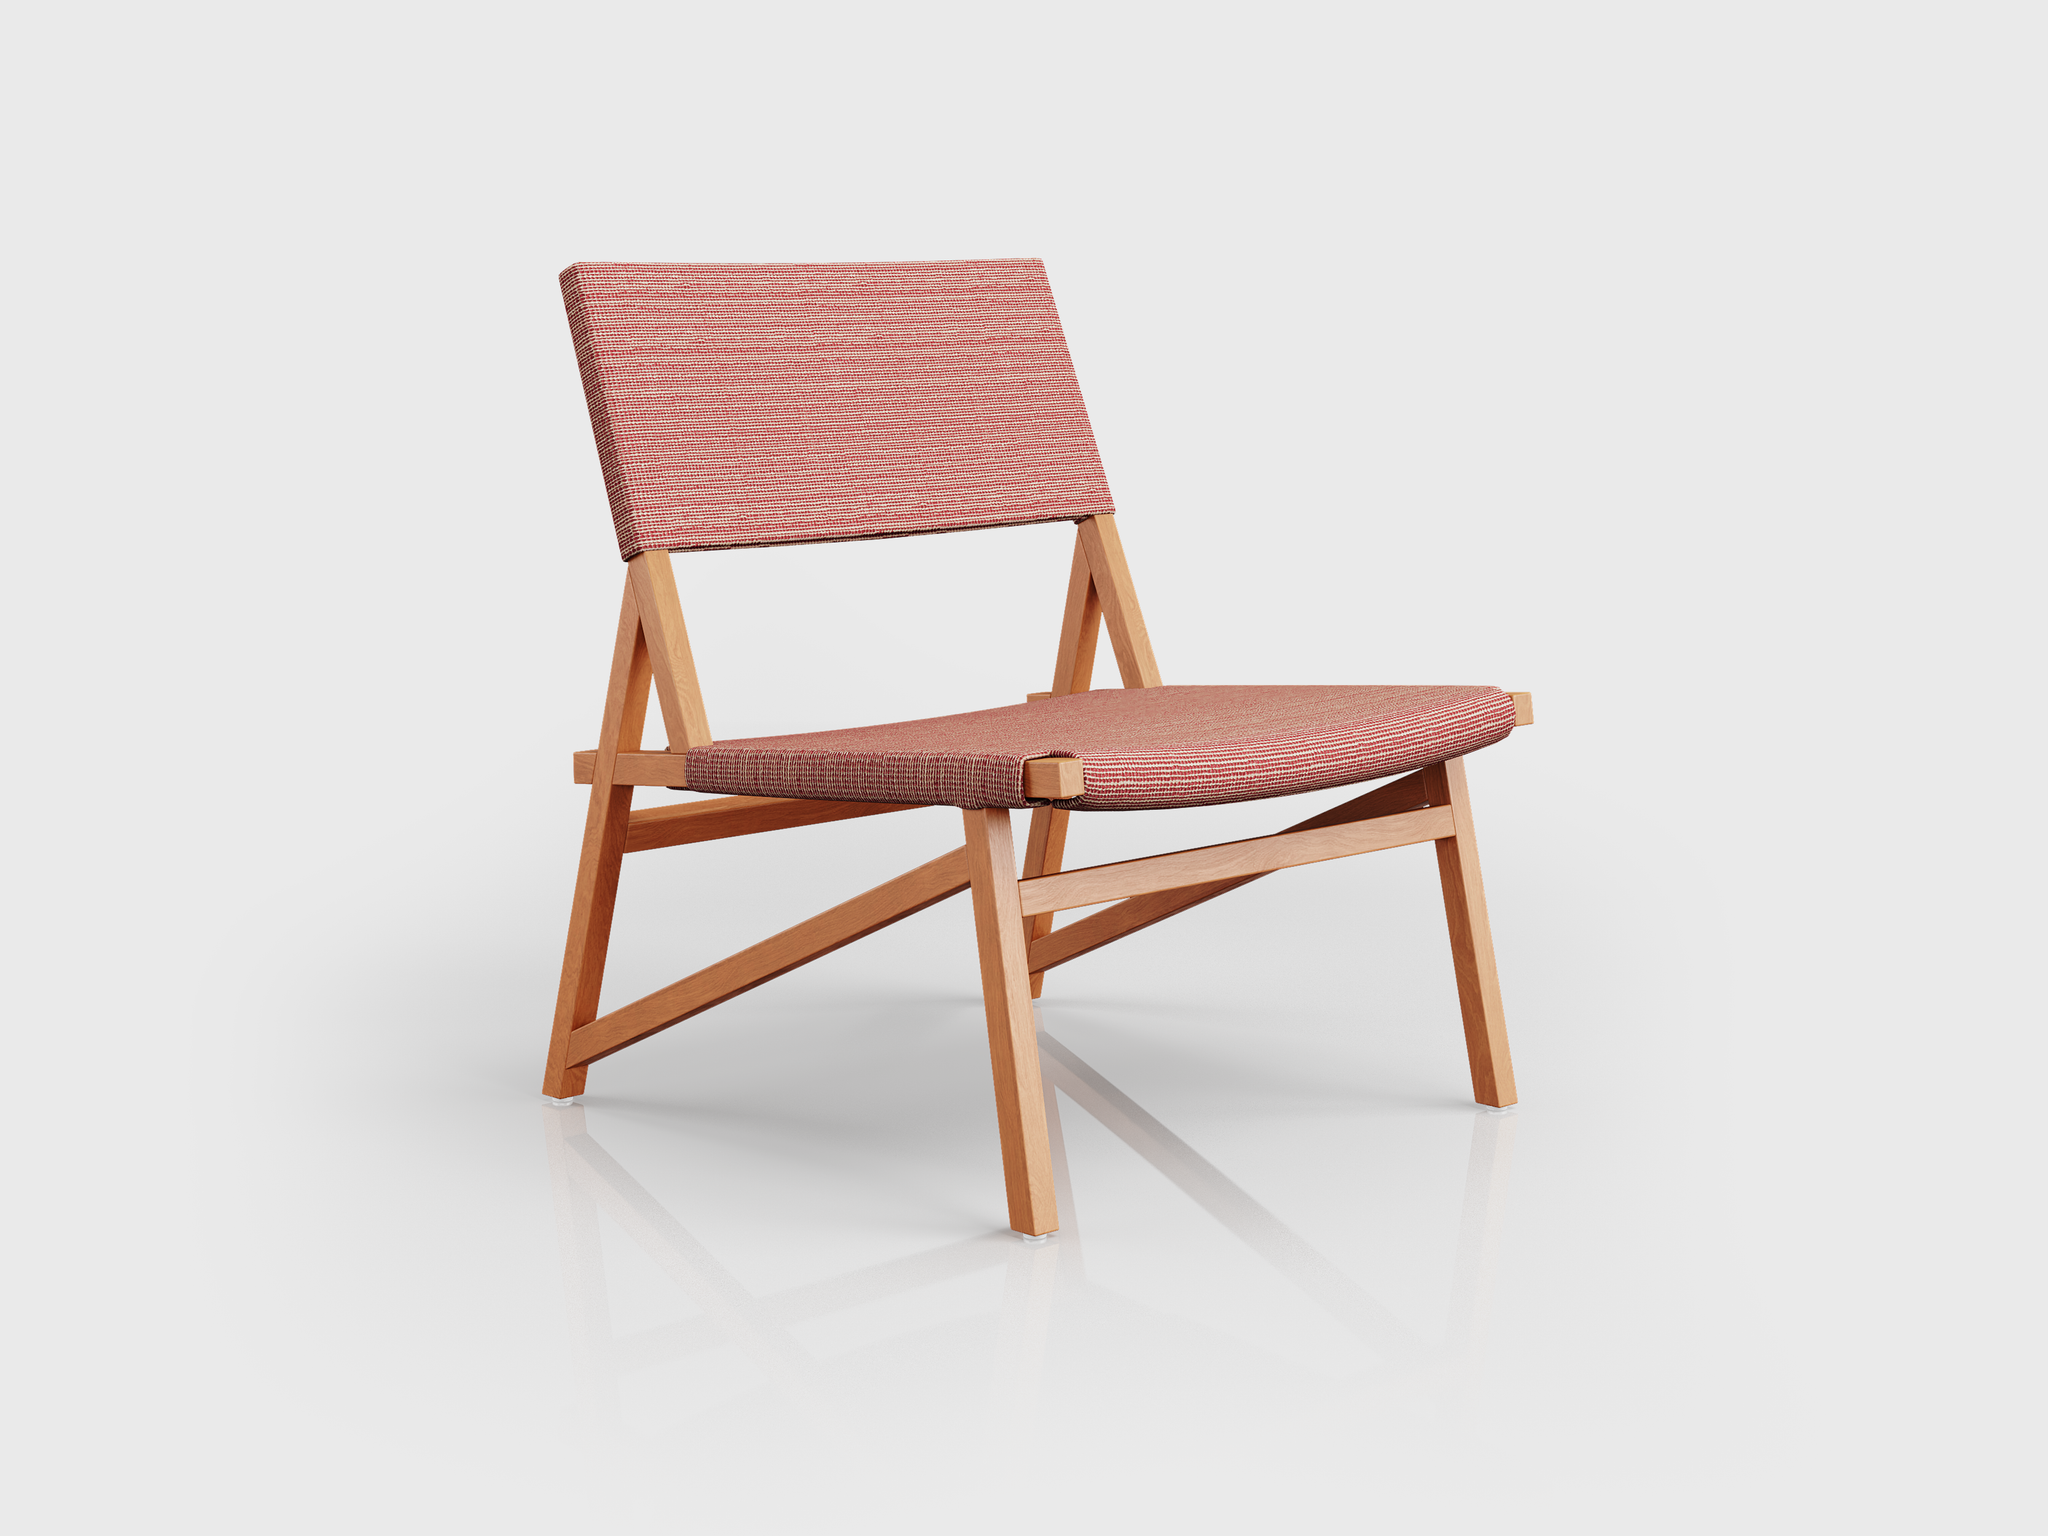 Quechua Lounge Chair with wood structure and upholstered seat and back, designed by Luciano Mandelli.